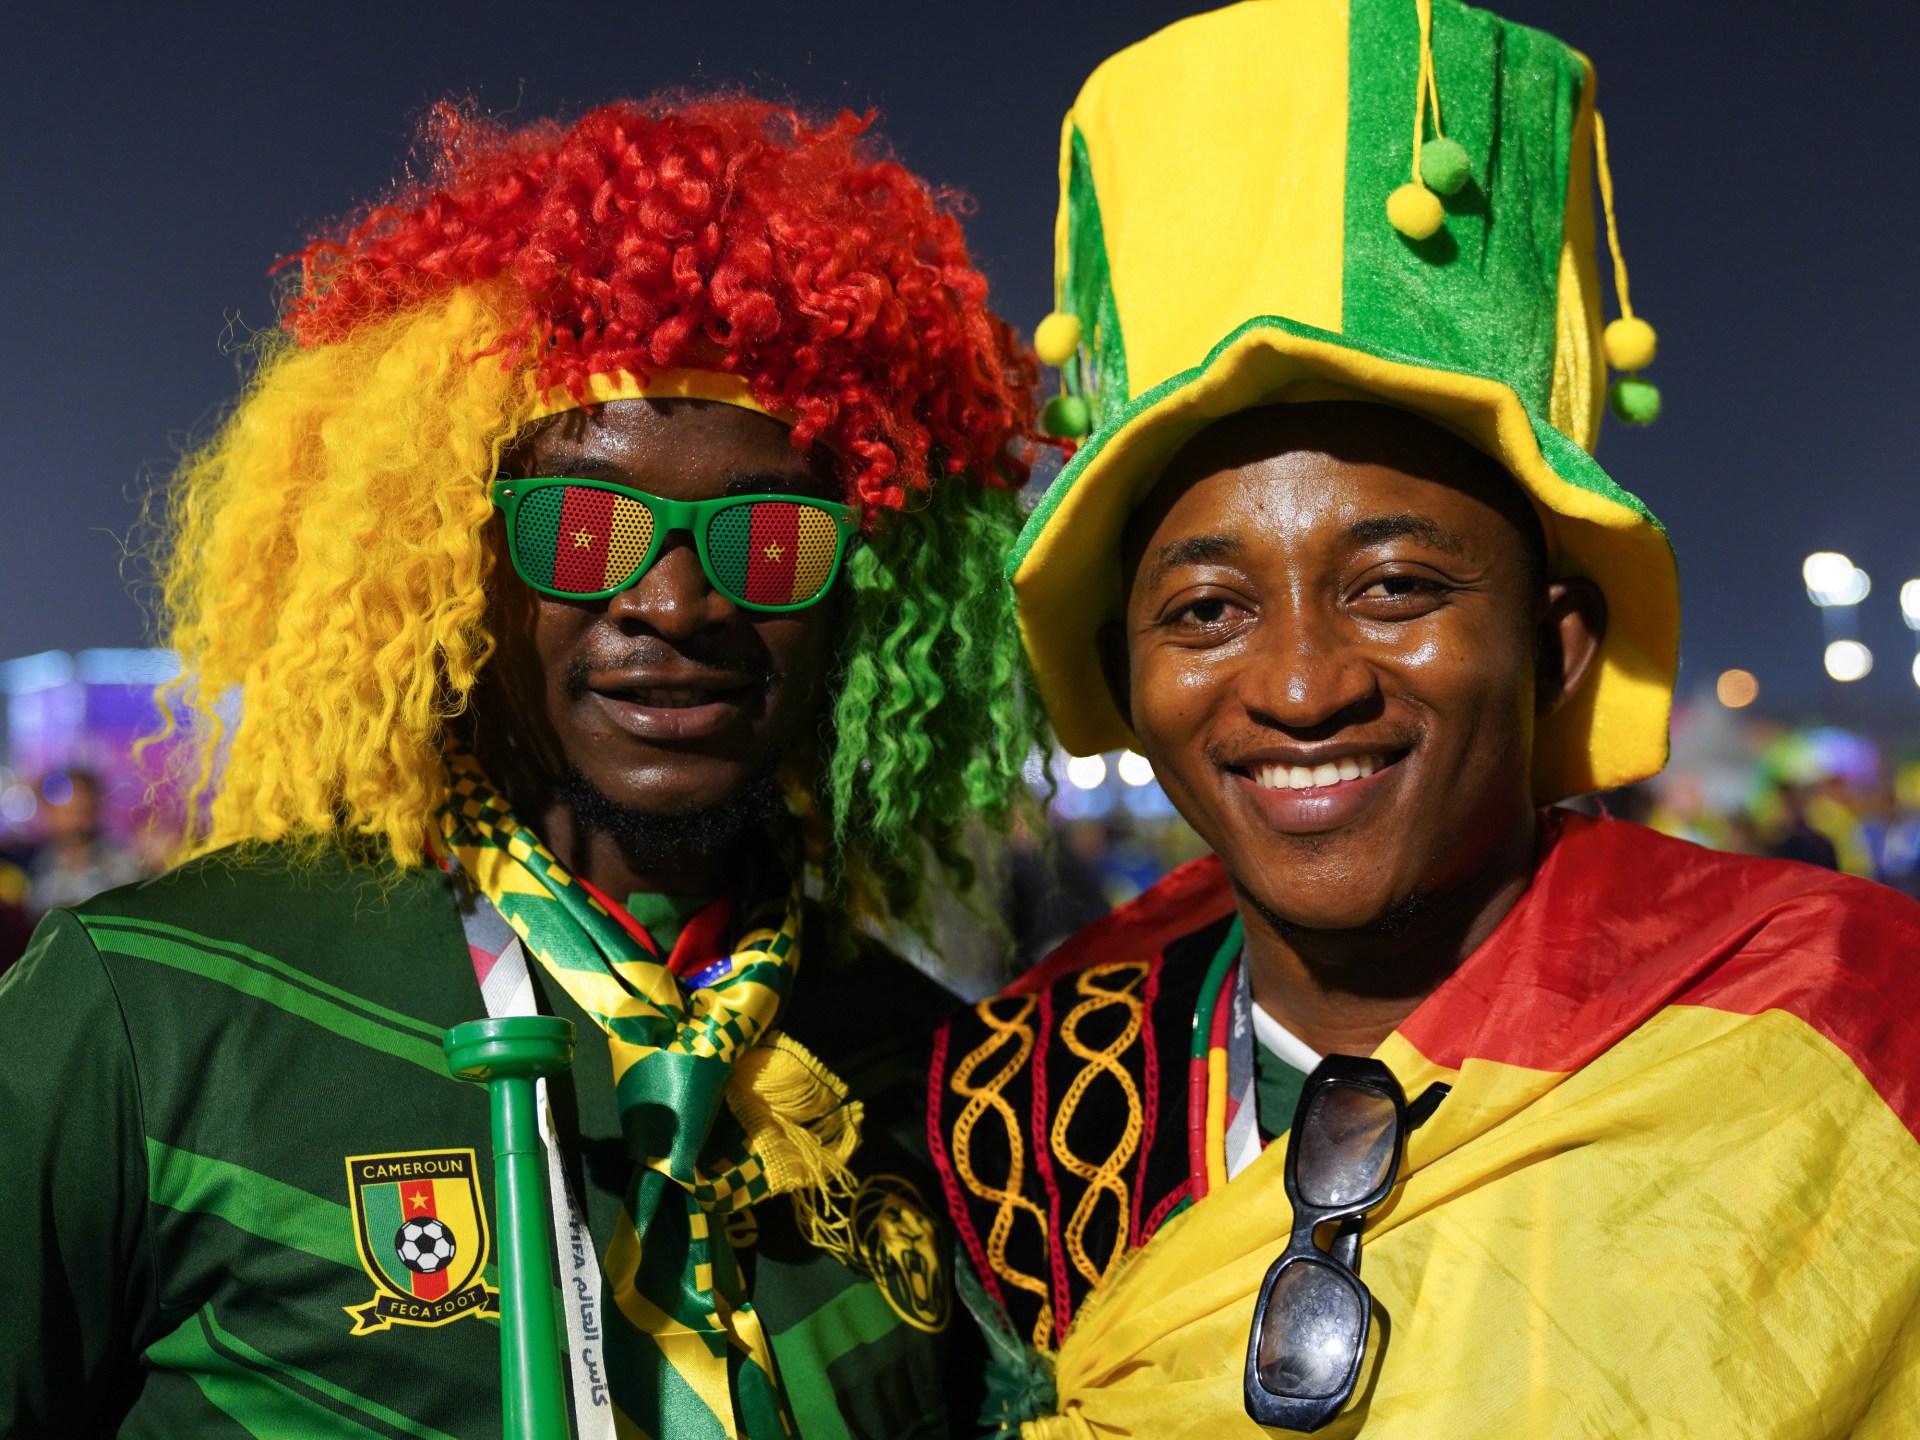 Cameroon followers have a good time after historic 1-0 victory over Brazil